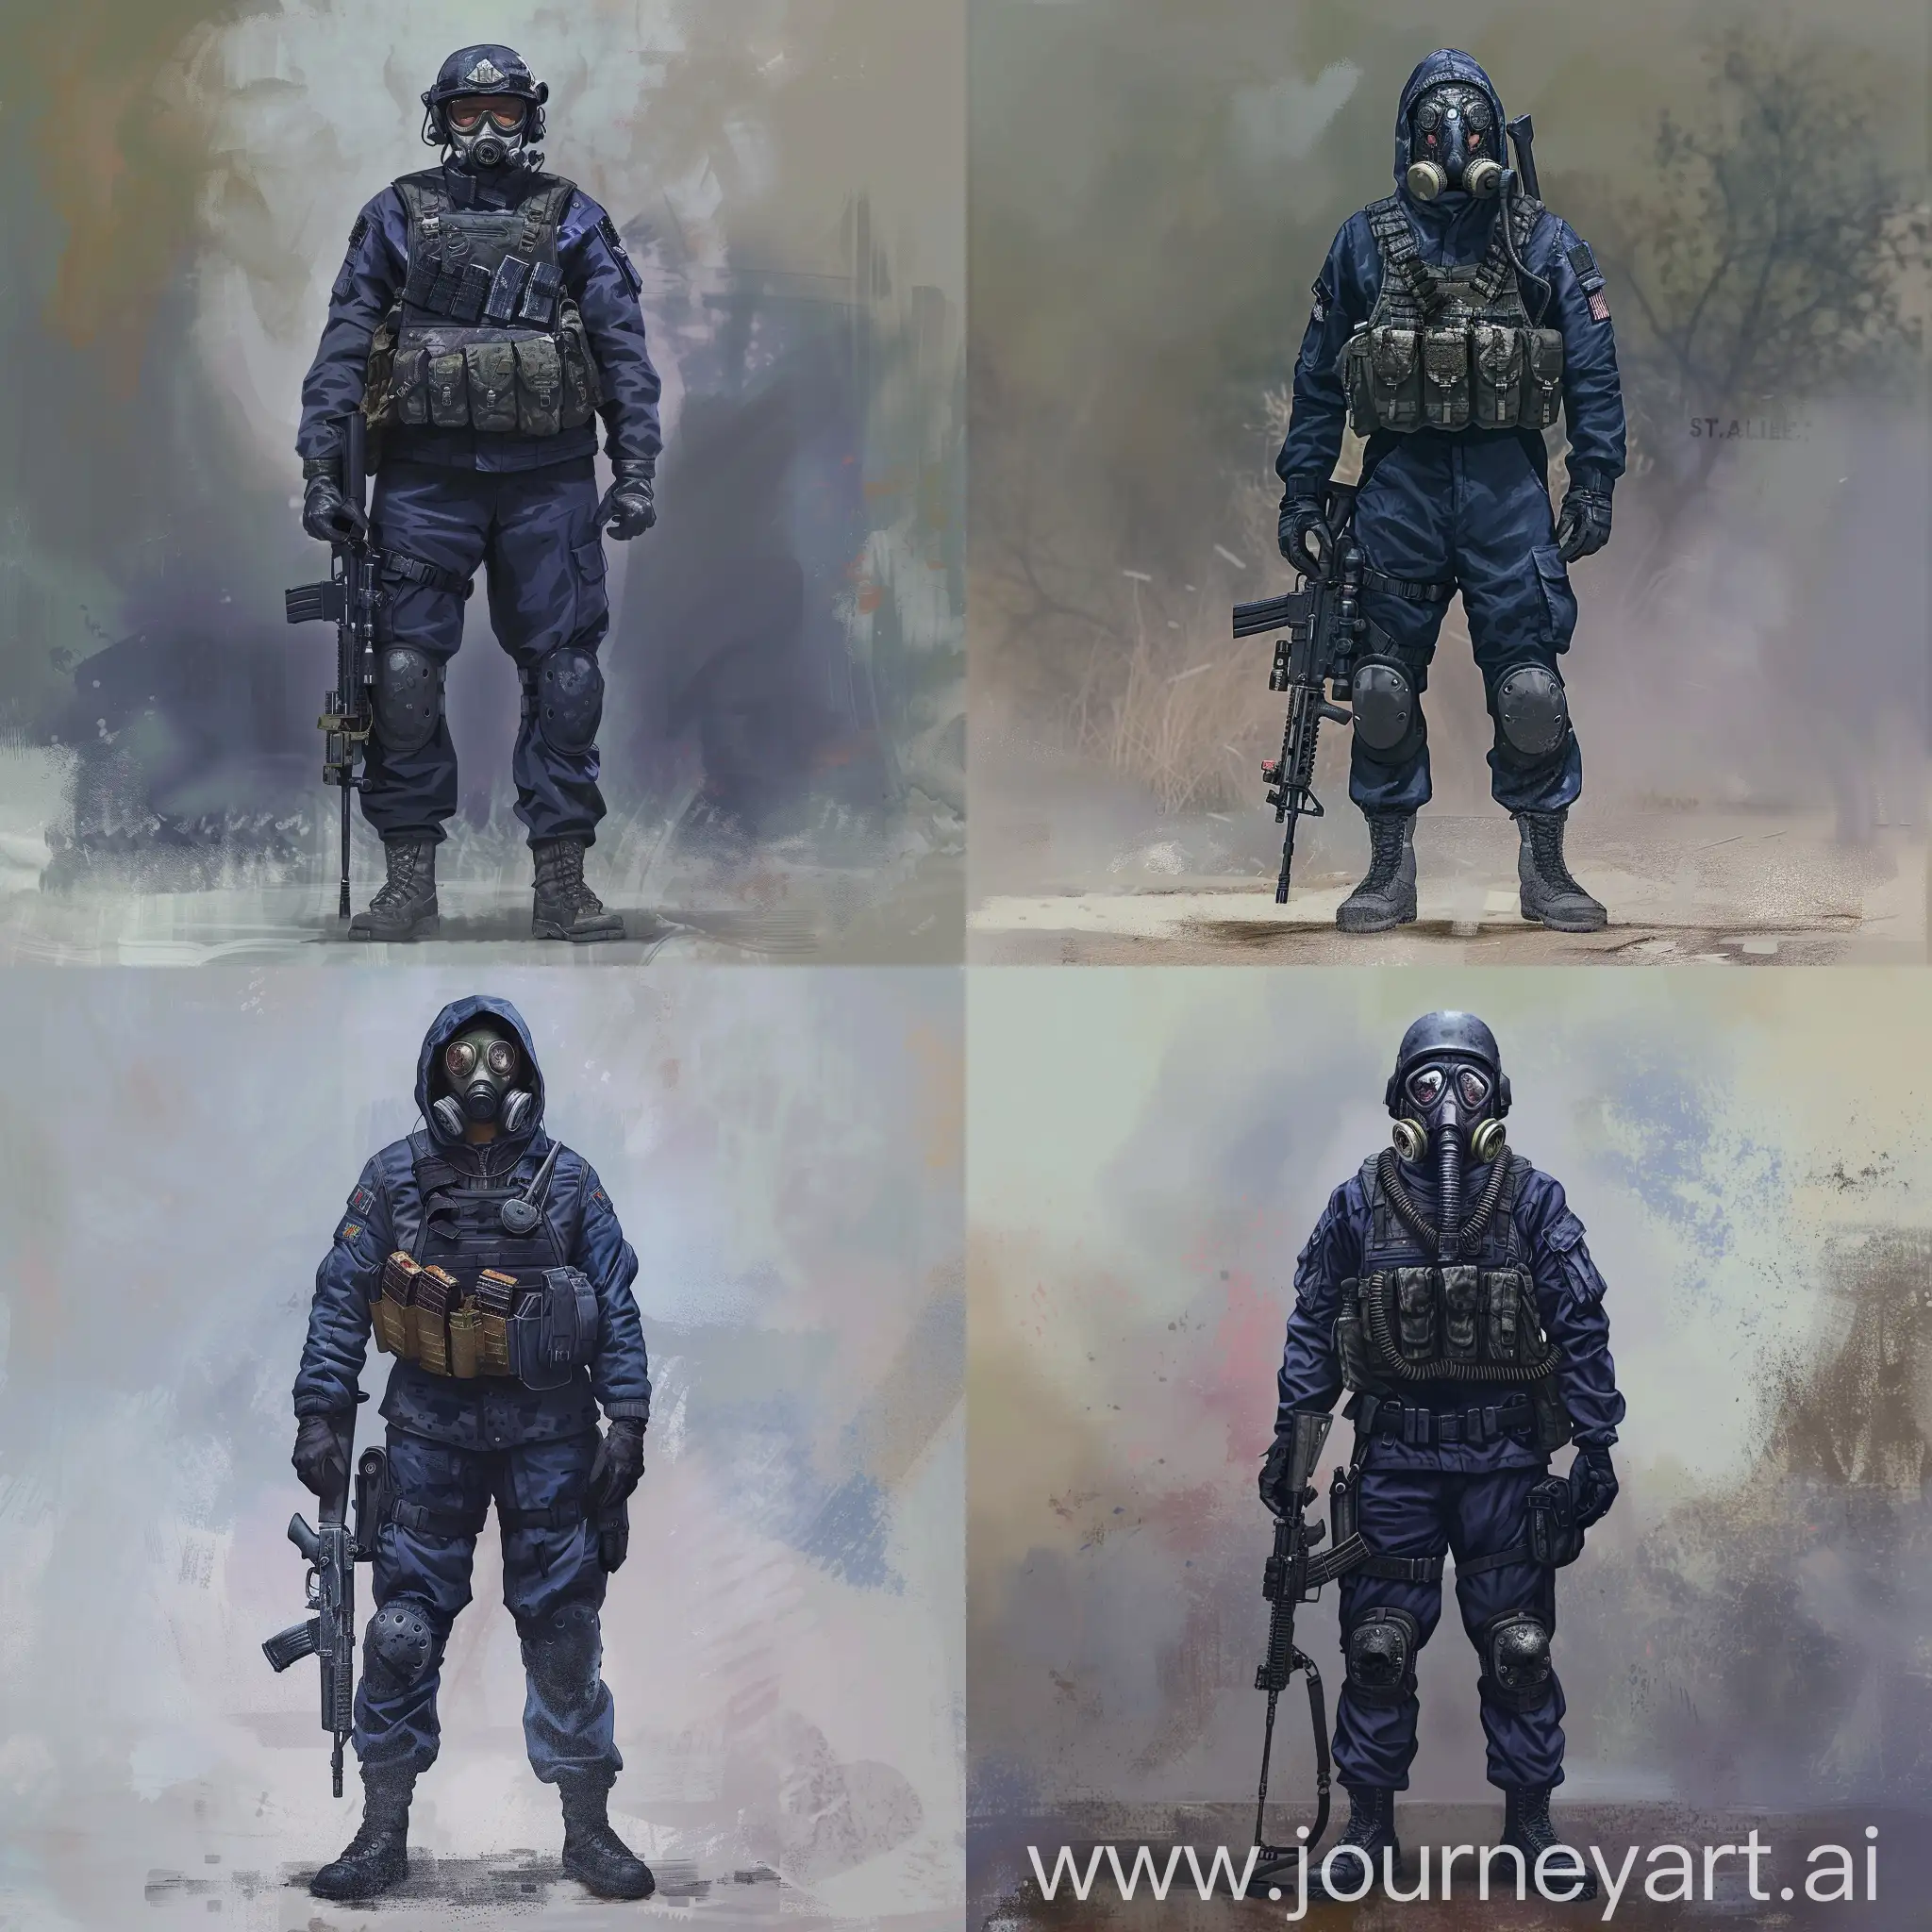 Concept Art: S.T.A.L.K.E.R. Mercenary in Full Gear
The image should depict a mercenary standing in a full-body shot, clad in their full gear,
Dark blue NATO military jumpsuit, protective suit
Military-grade bulletproof vest,
Black gloves,
GP-5 gasmask,
Small backpack on the back,
Sniper rifle in the hands,
The mercenary should appear rugged and experienced, with a determined expression on their face,
The gear should look realistic and functional,
The background can be blurred, depicting the grim and dangerous setting of the Zone.
